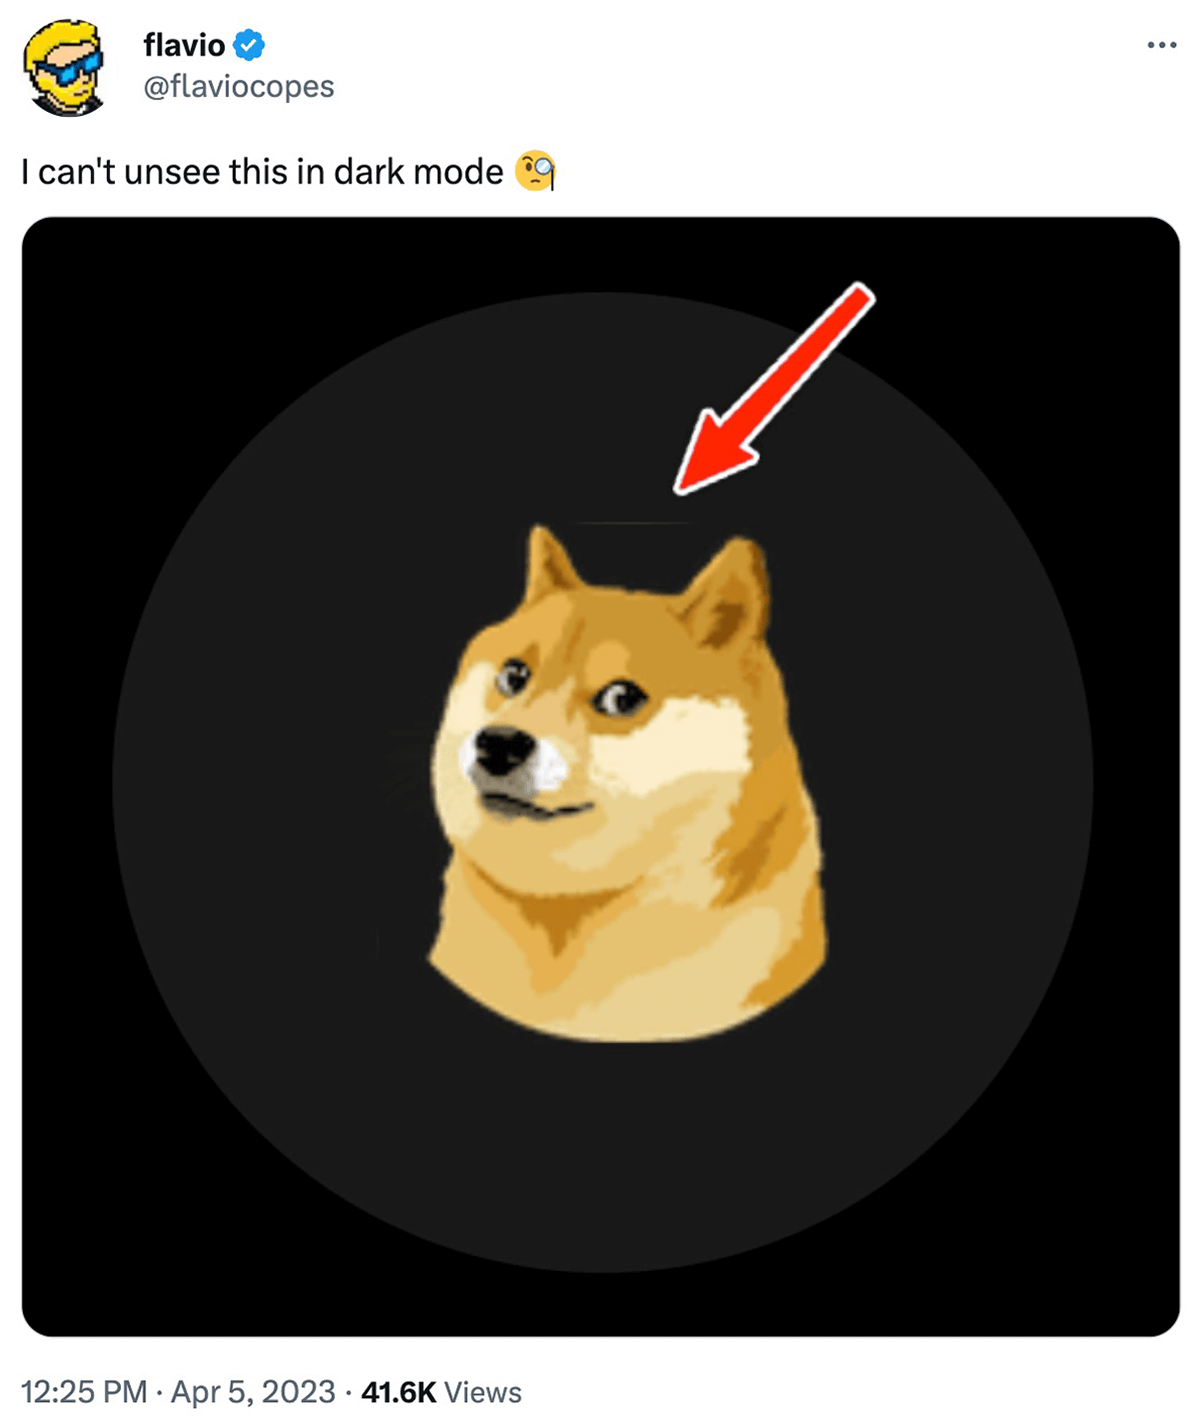 @flaviocopes on twitter: I can't unsee this in dark mode, image of the dogedog logo with a thin grey line between it's ears